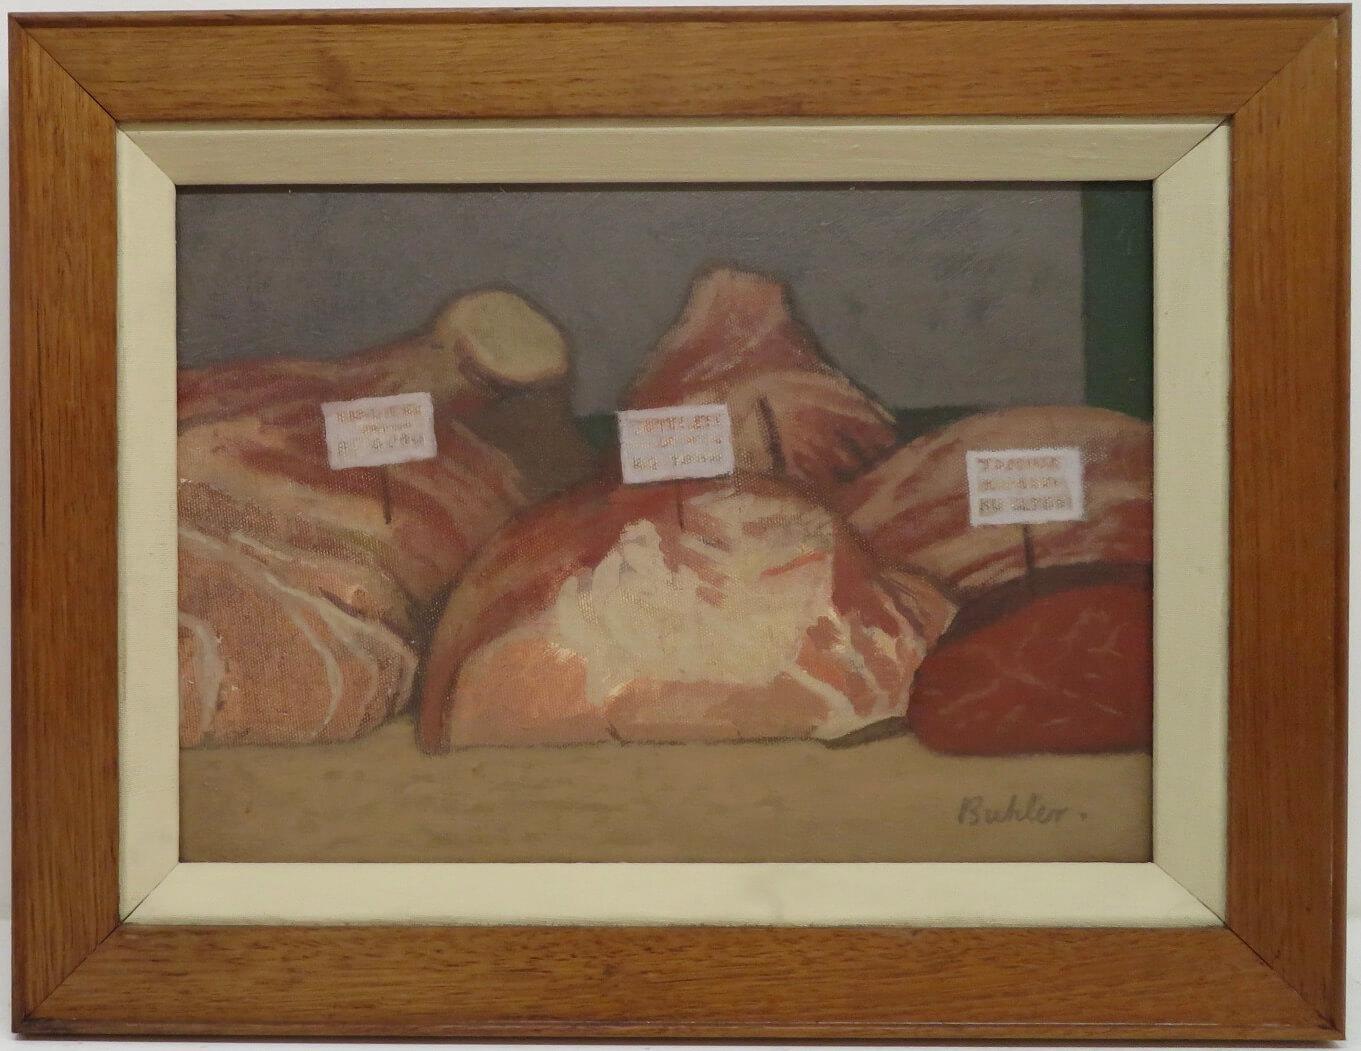 Robert butler Still-Life Painting - ROBERT BUHLER R.A. original SIGNED MID CENTURY OIL PAINTING 'THE BUTCHERS BOARD'